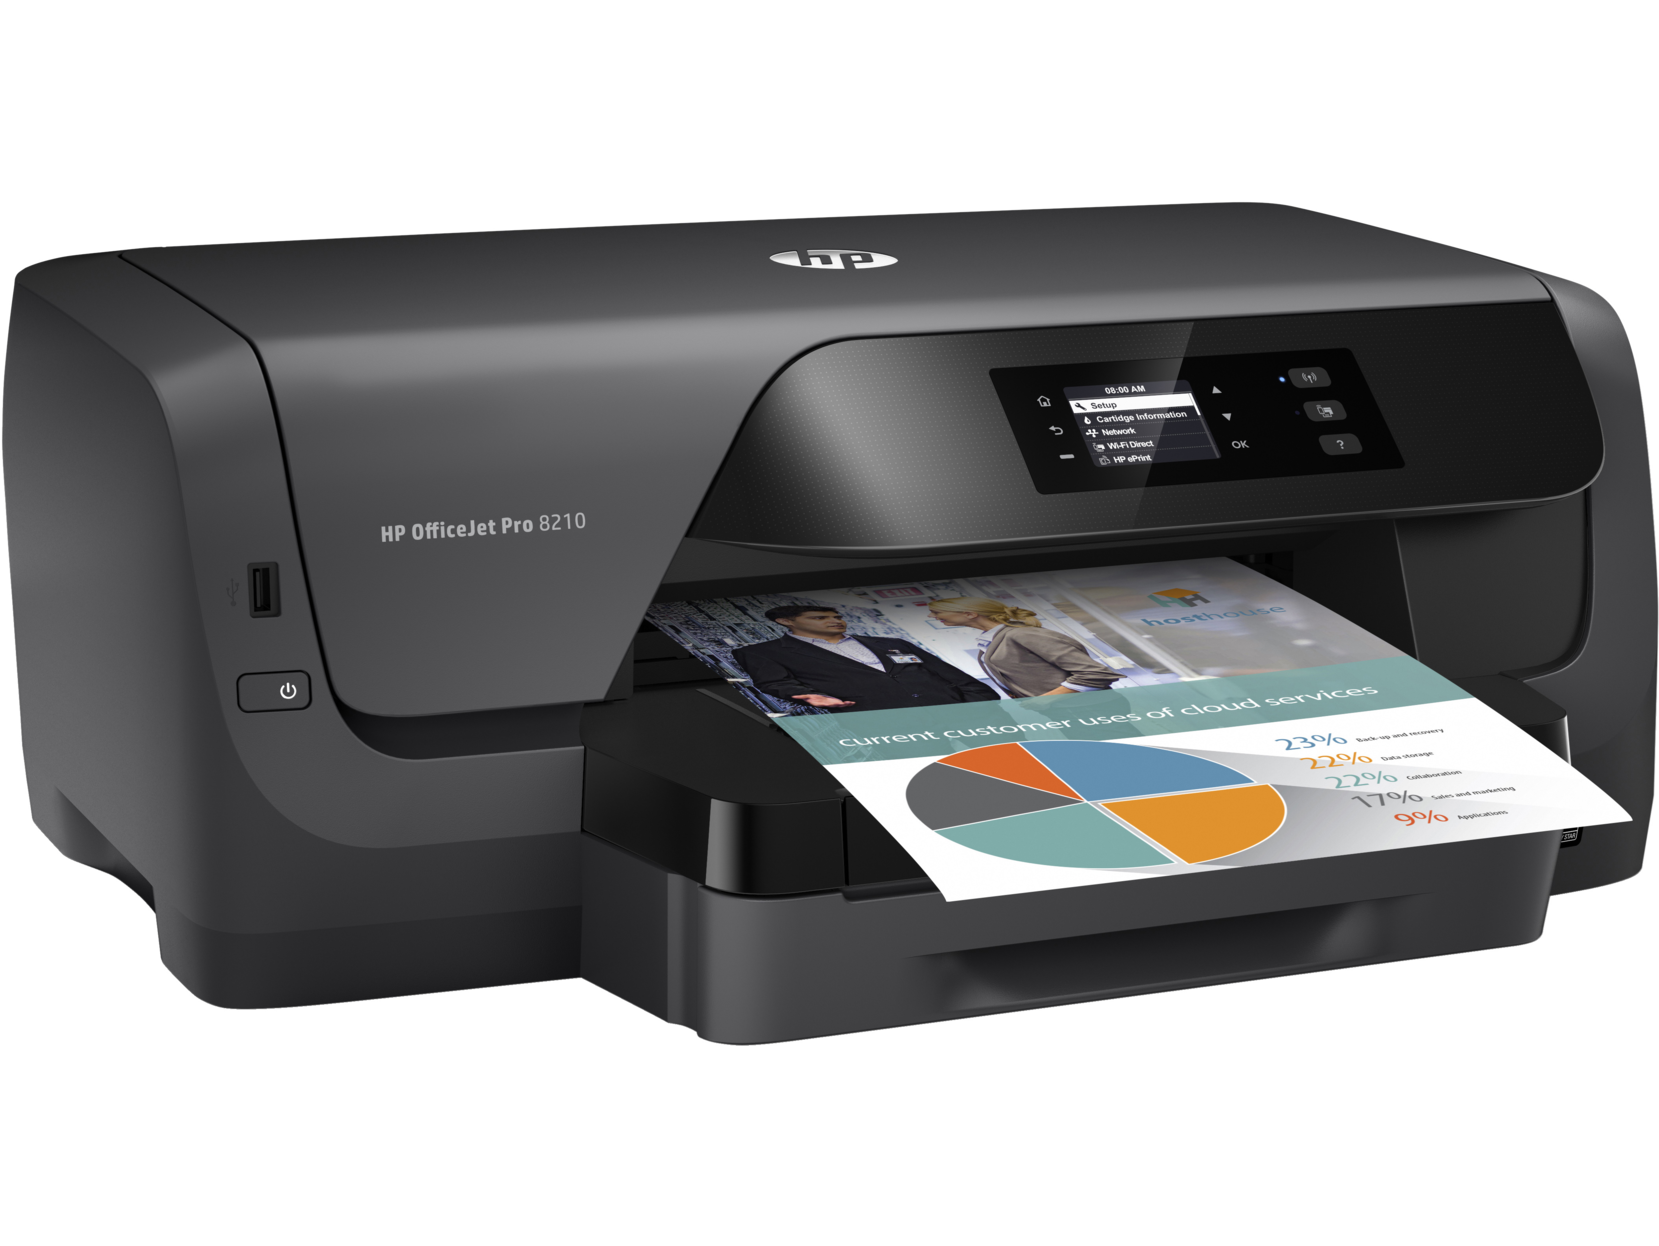 HP OfficeJet Pro 8210 Printer | Print only, wireless | D9L64A - image 4 of 7